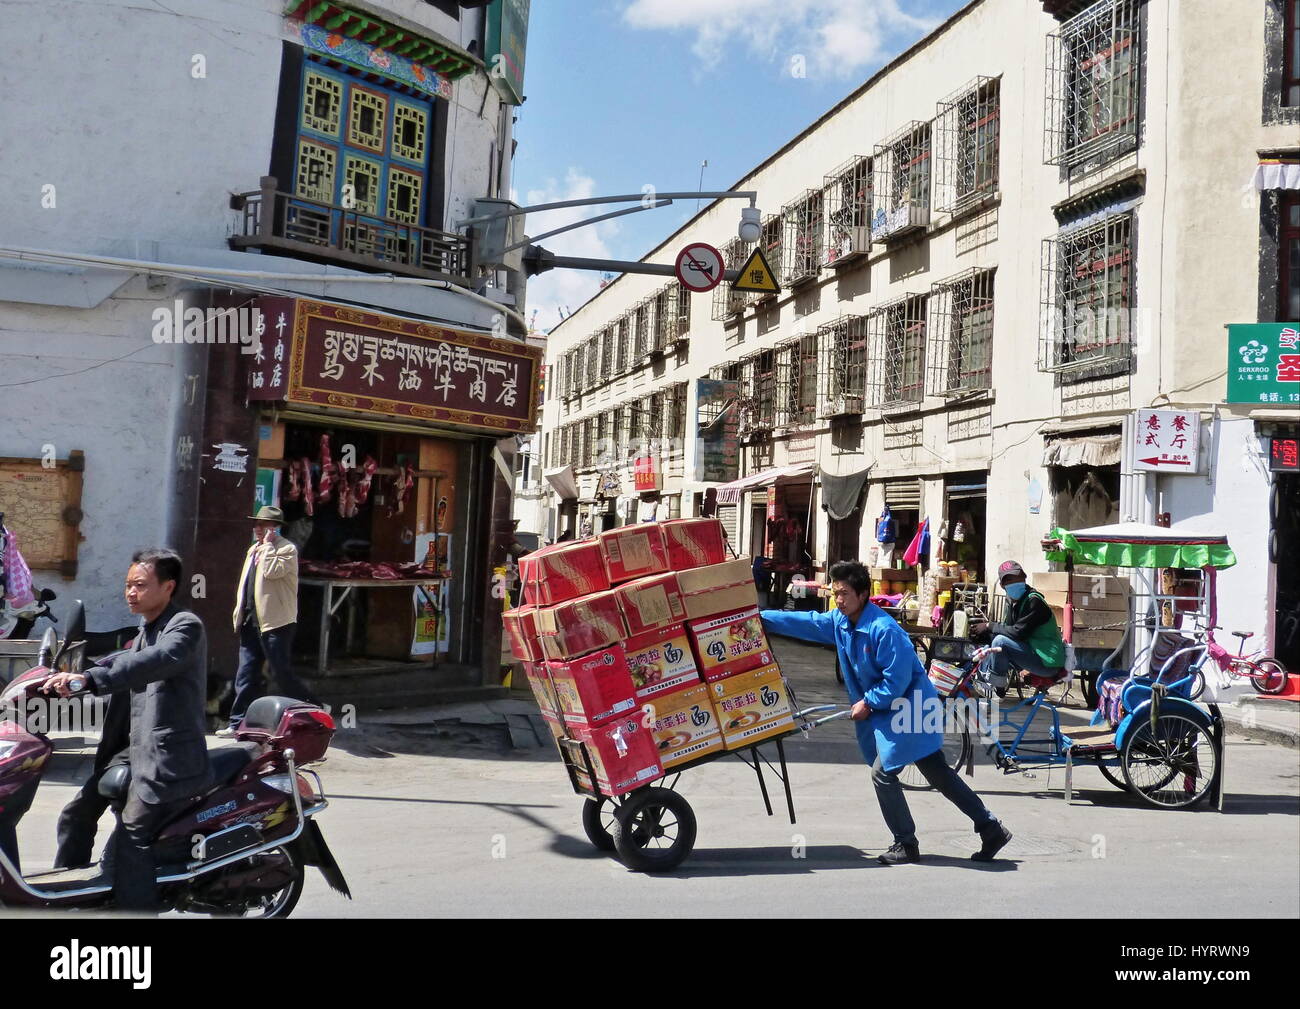 A street scene in Lhasa, Tibet with a vendor pushing his wares and other modes of transport Stock Photo